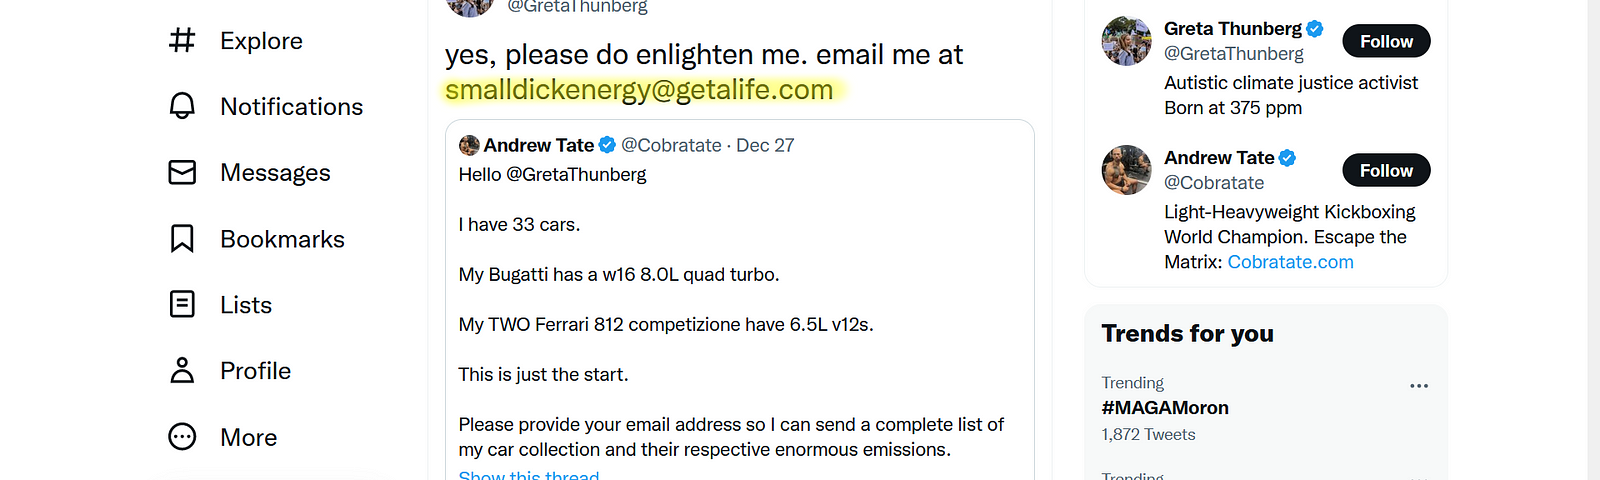 The tweets read: “yes, please do enlighten me. email me at smalldickenergy@getalife.com” Quote Tweet Andrew Tate @Cobratate · “Hello @GretaThunberg I have 33 cars. My Bugatti has a w16 8.0L quad turbo. My TWO Ferrari 812 competizione have 6.5L v12s. This is just the start. Please provide your email address so I can send a complete list of my car collection and their respective enormous emissions.”